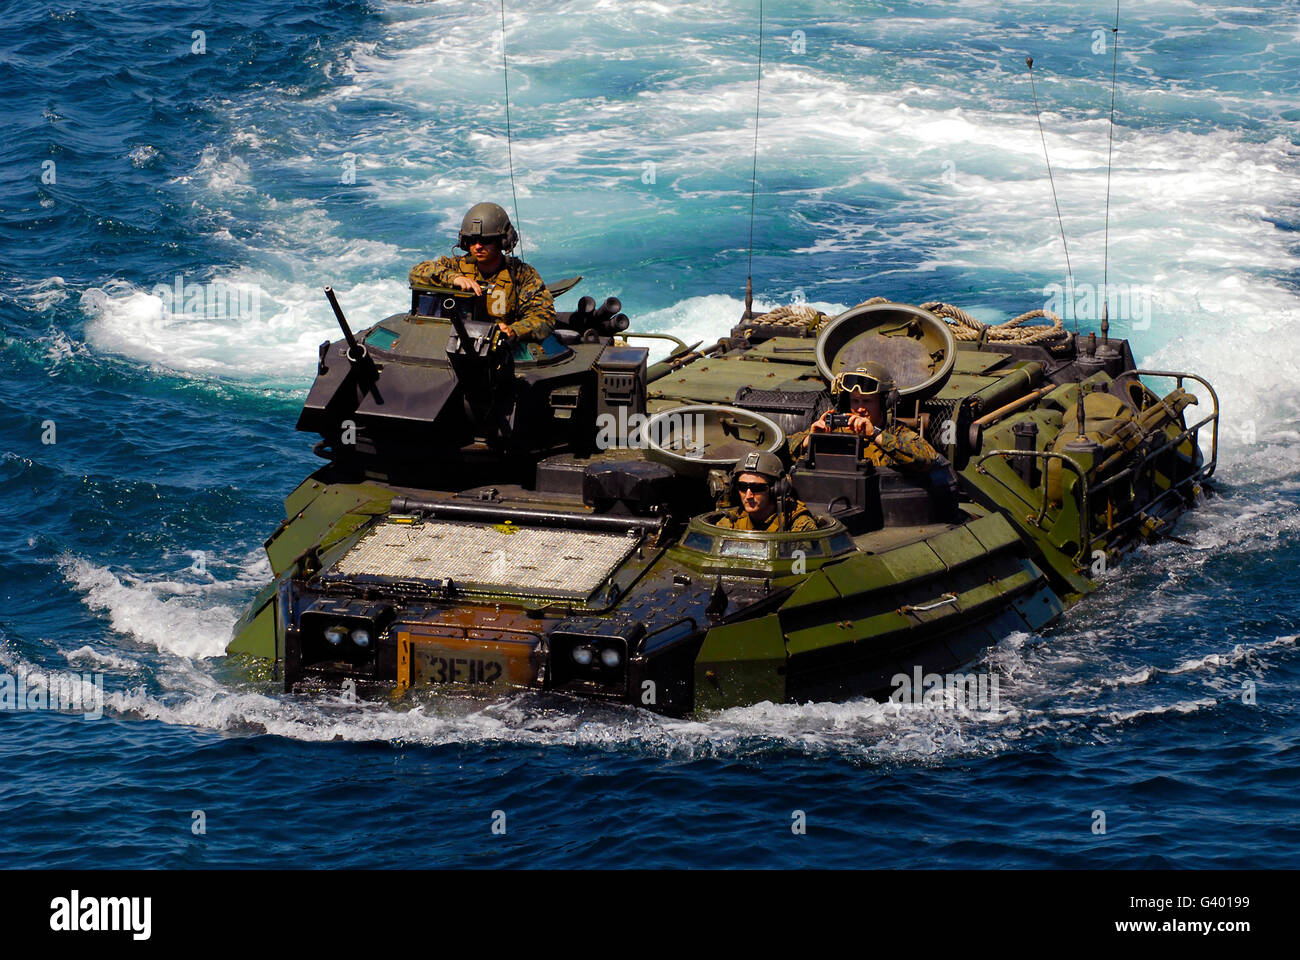 U.S. Marines transit the open water in an amphibious assault vehicle. Stock Photo